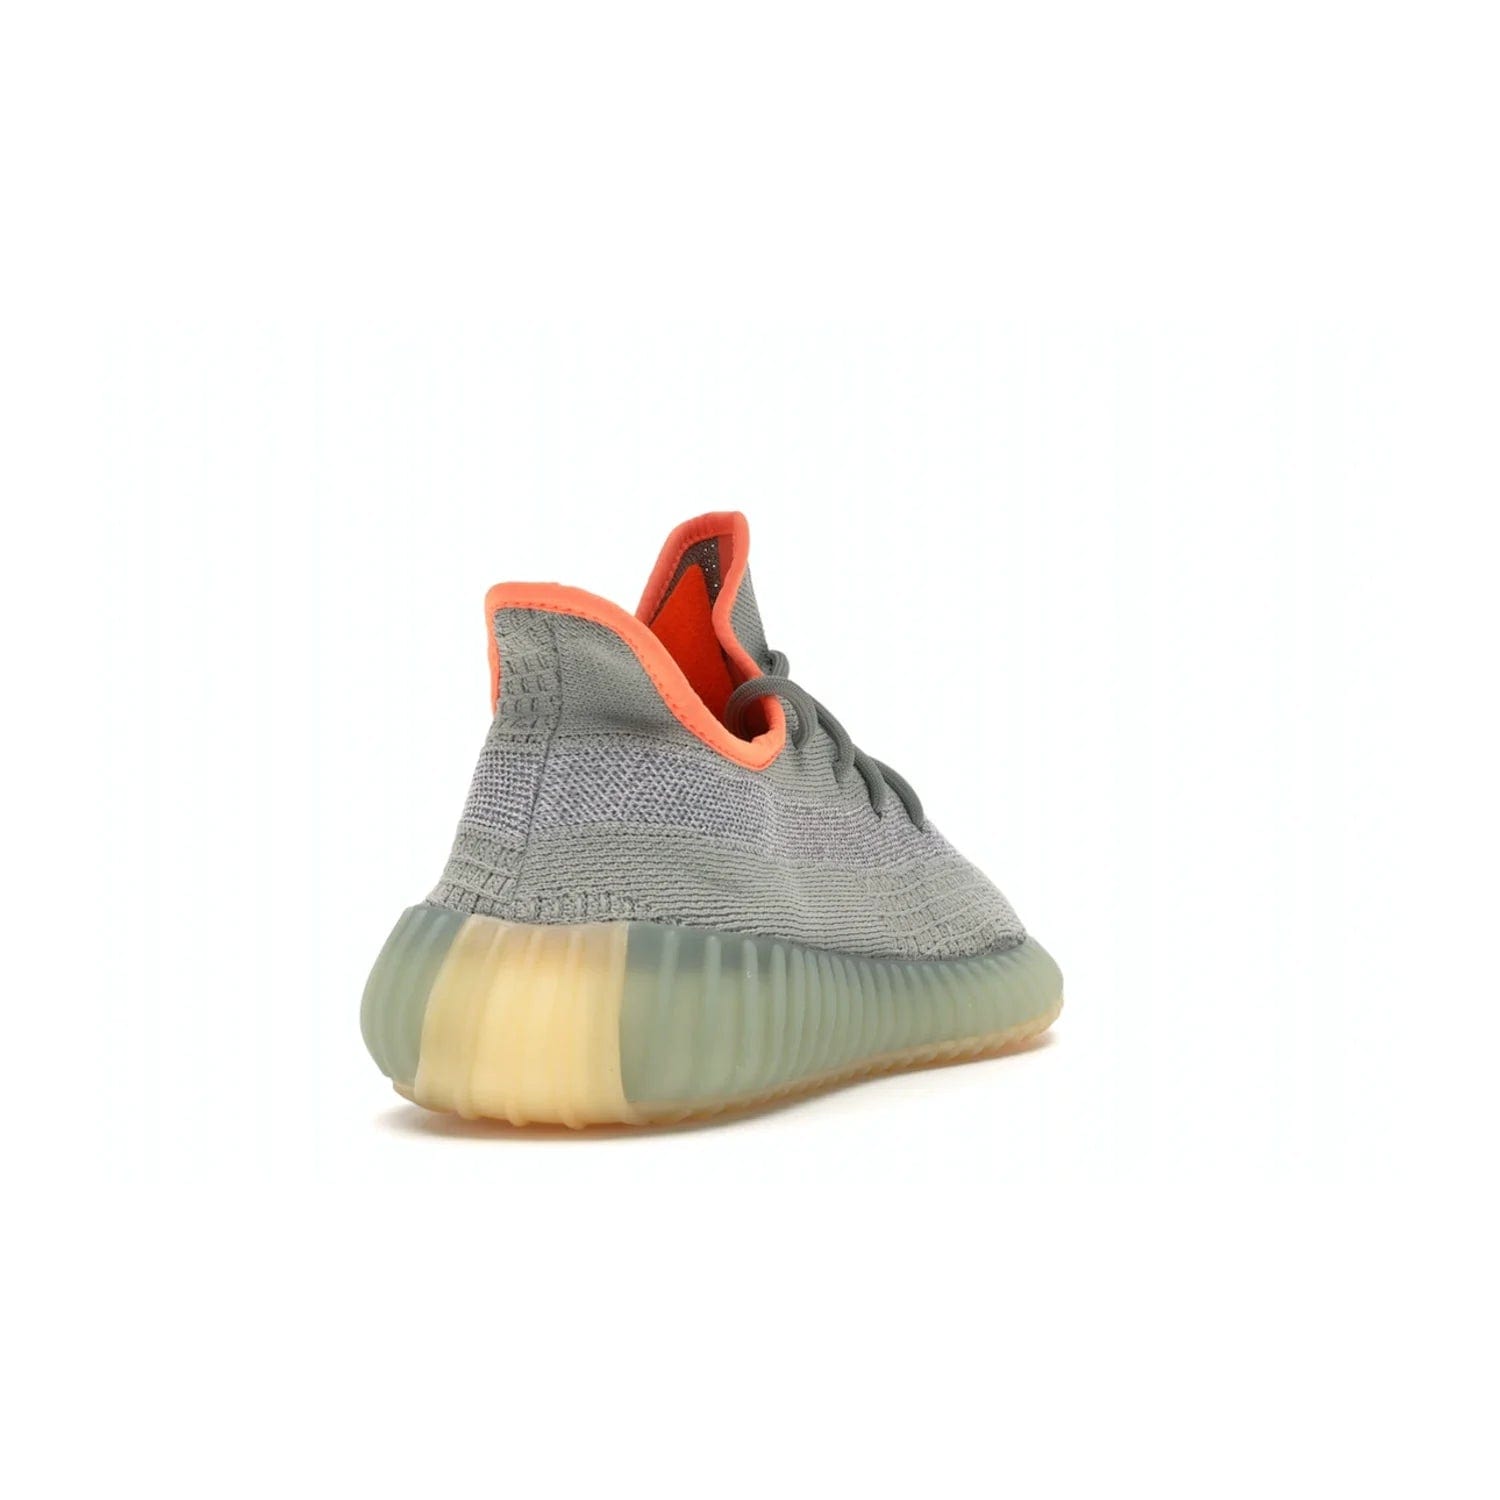 adidas Yeezy Boost 350 V2 Desert Sage - Image 30 - Only at www.BallersClubKickz.com - Upgrade your style with the adidas Yeezy Boost 350 V2 Desert Sage. This 350V2 features a Desert Sage primeknit upper with tonal side stripe, and an orange-highlighted translucent Boost cushioning sole. Stay on-trend in effortless style.